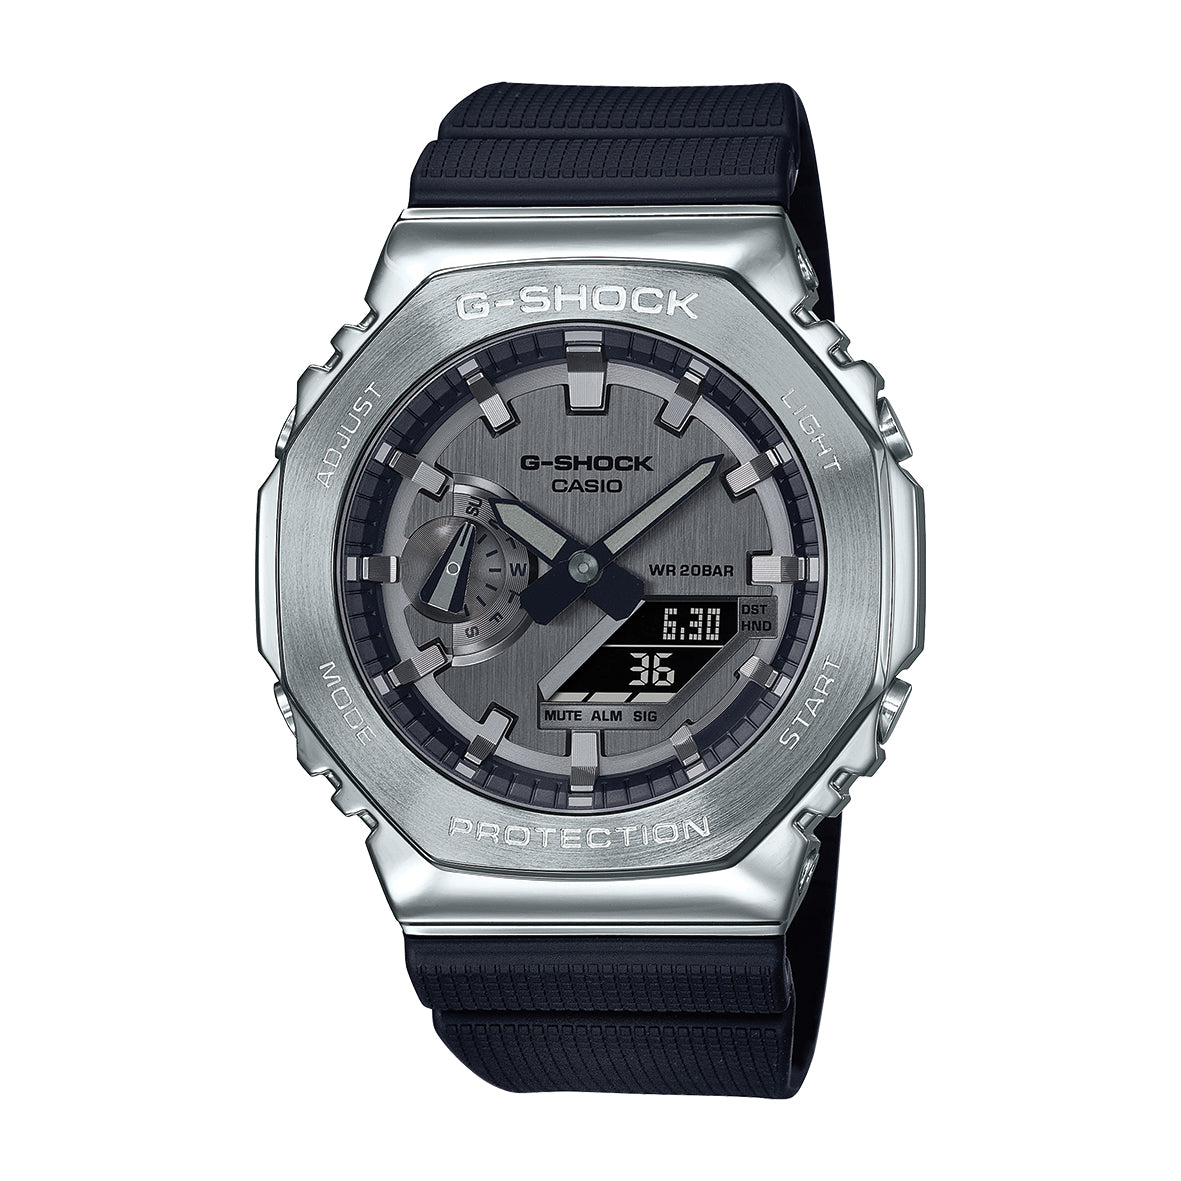 Mens Casio G-Shockstainless Case Resin Band